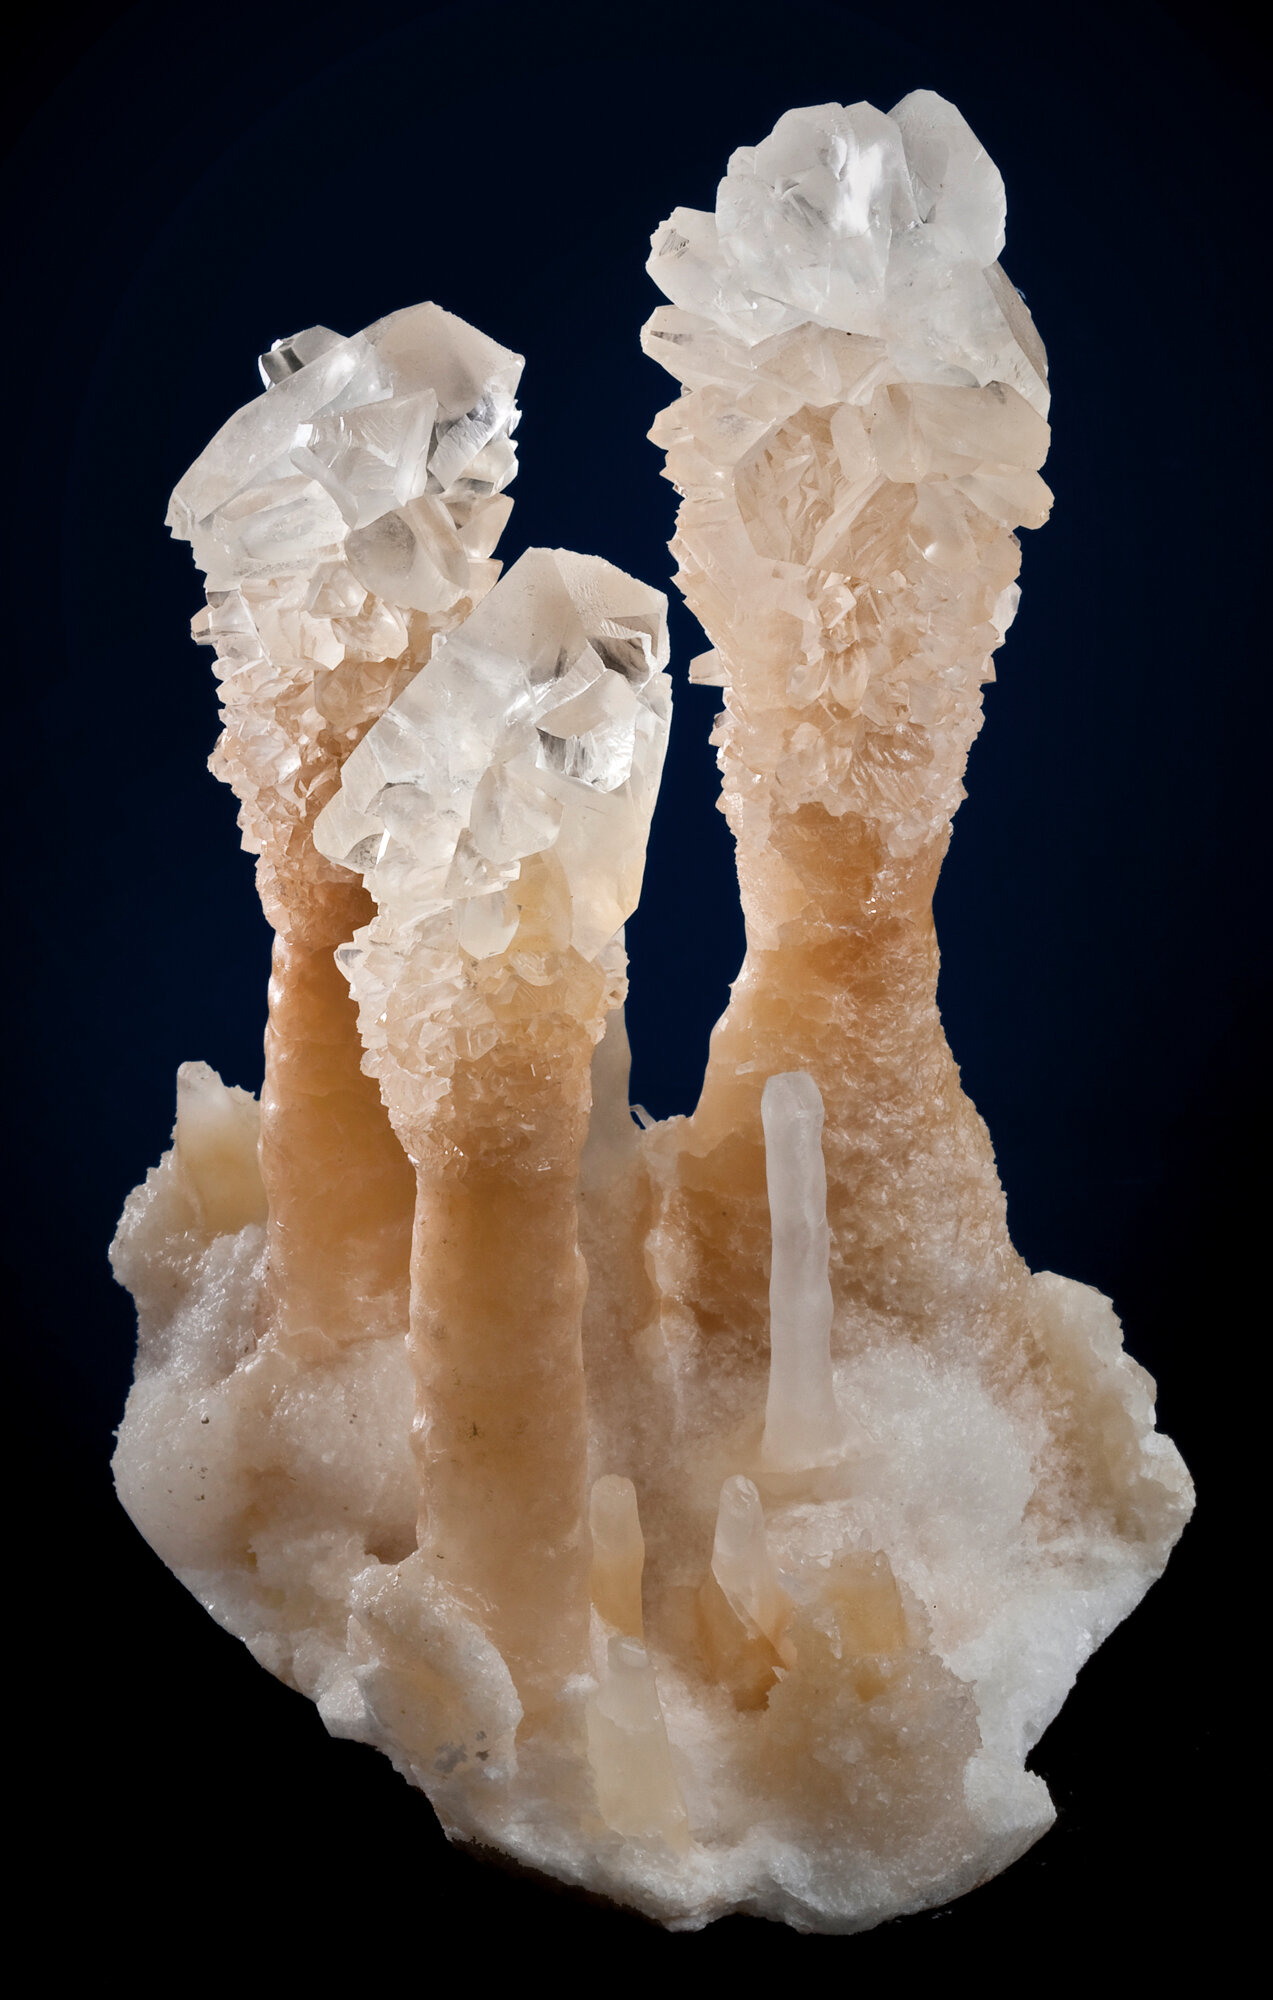  Calcite cave formation, 24.3 cm, from Wenshan County, Wenshan Prefecture, Yunnan Province, China. 